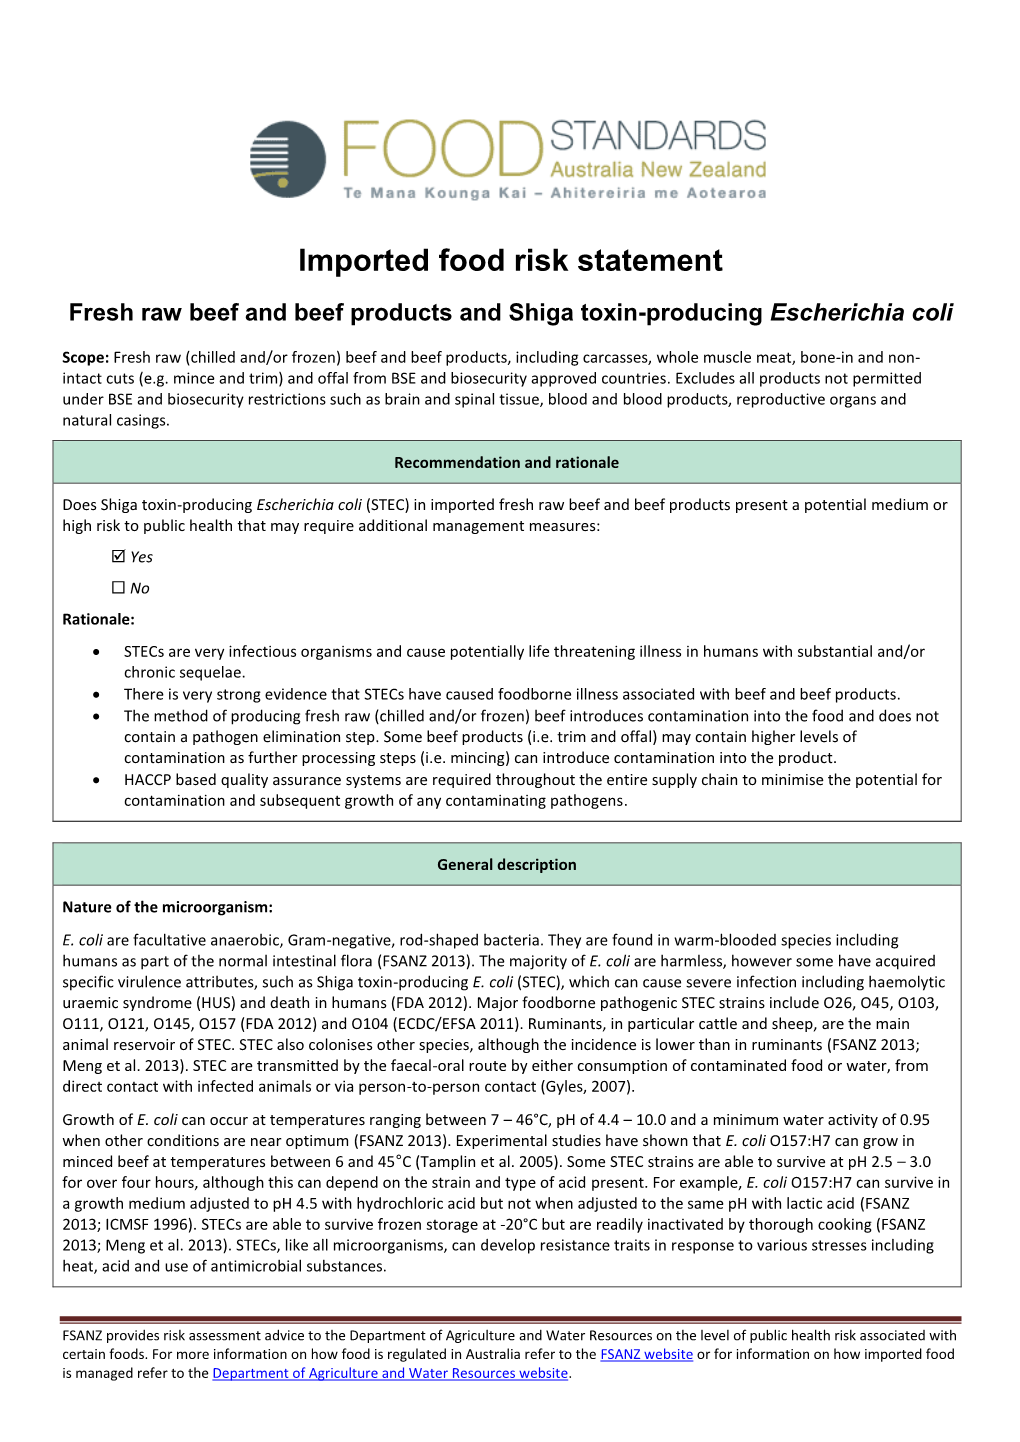 Imported Food Risk Statement